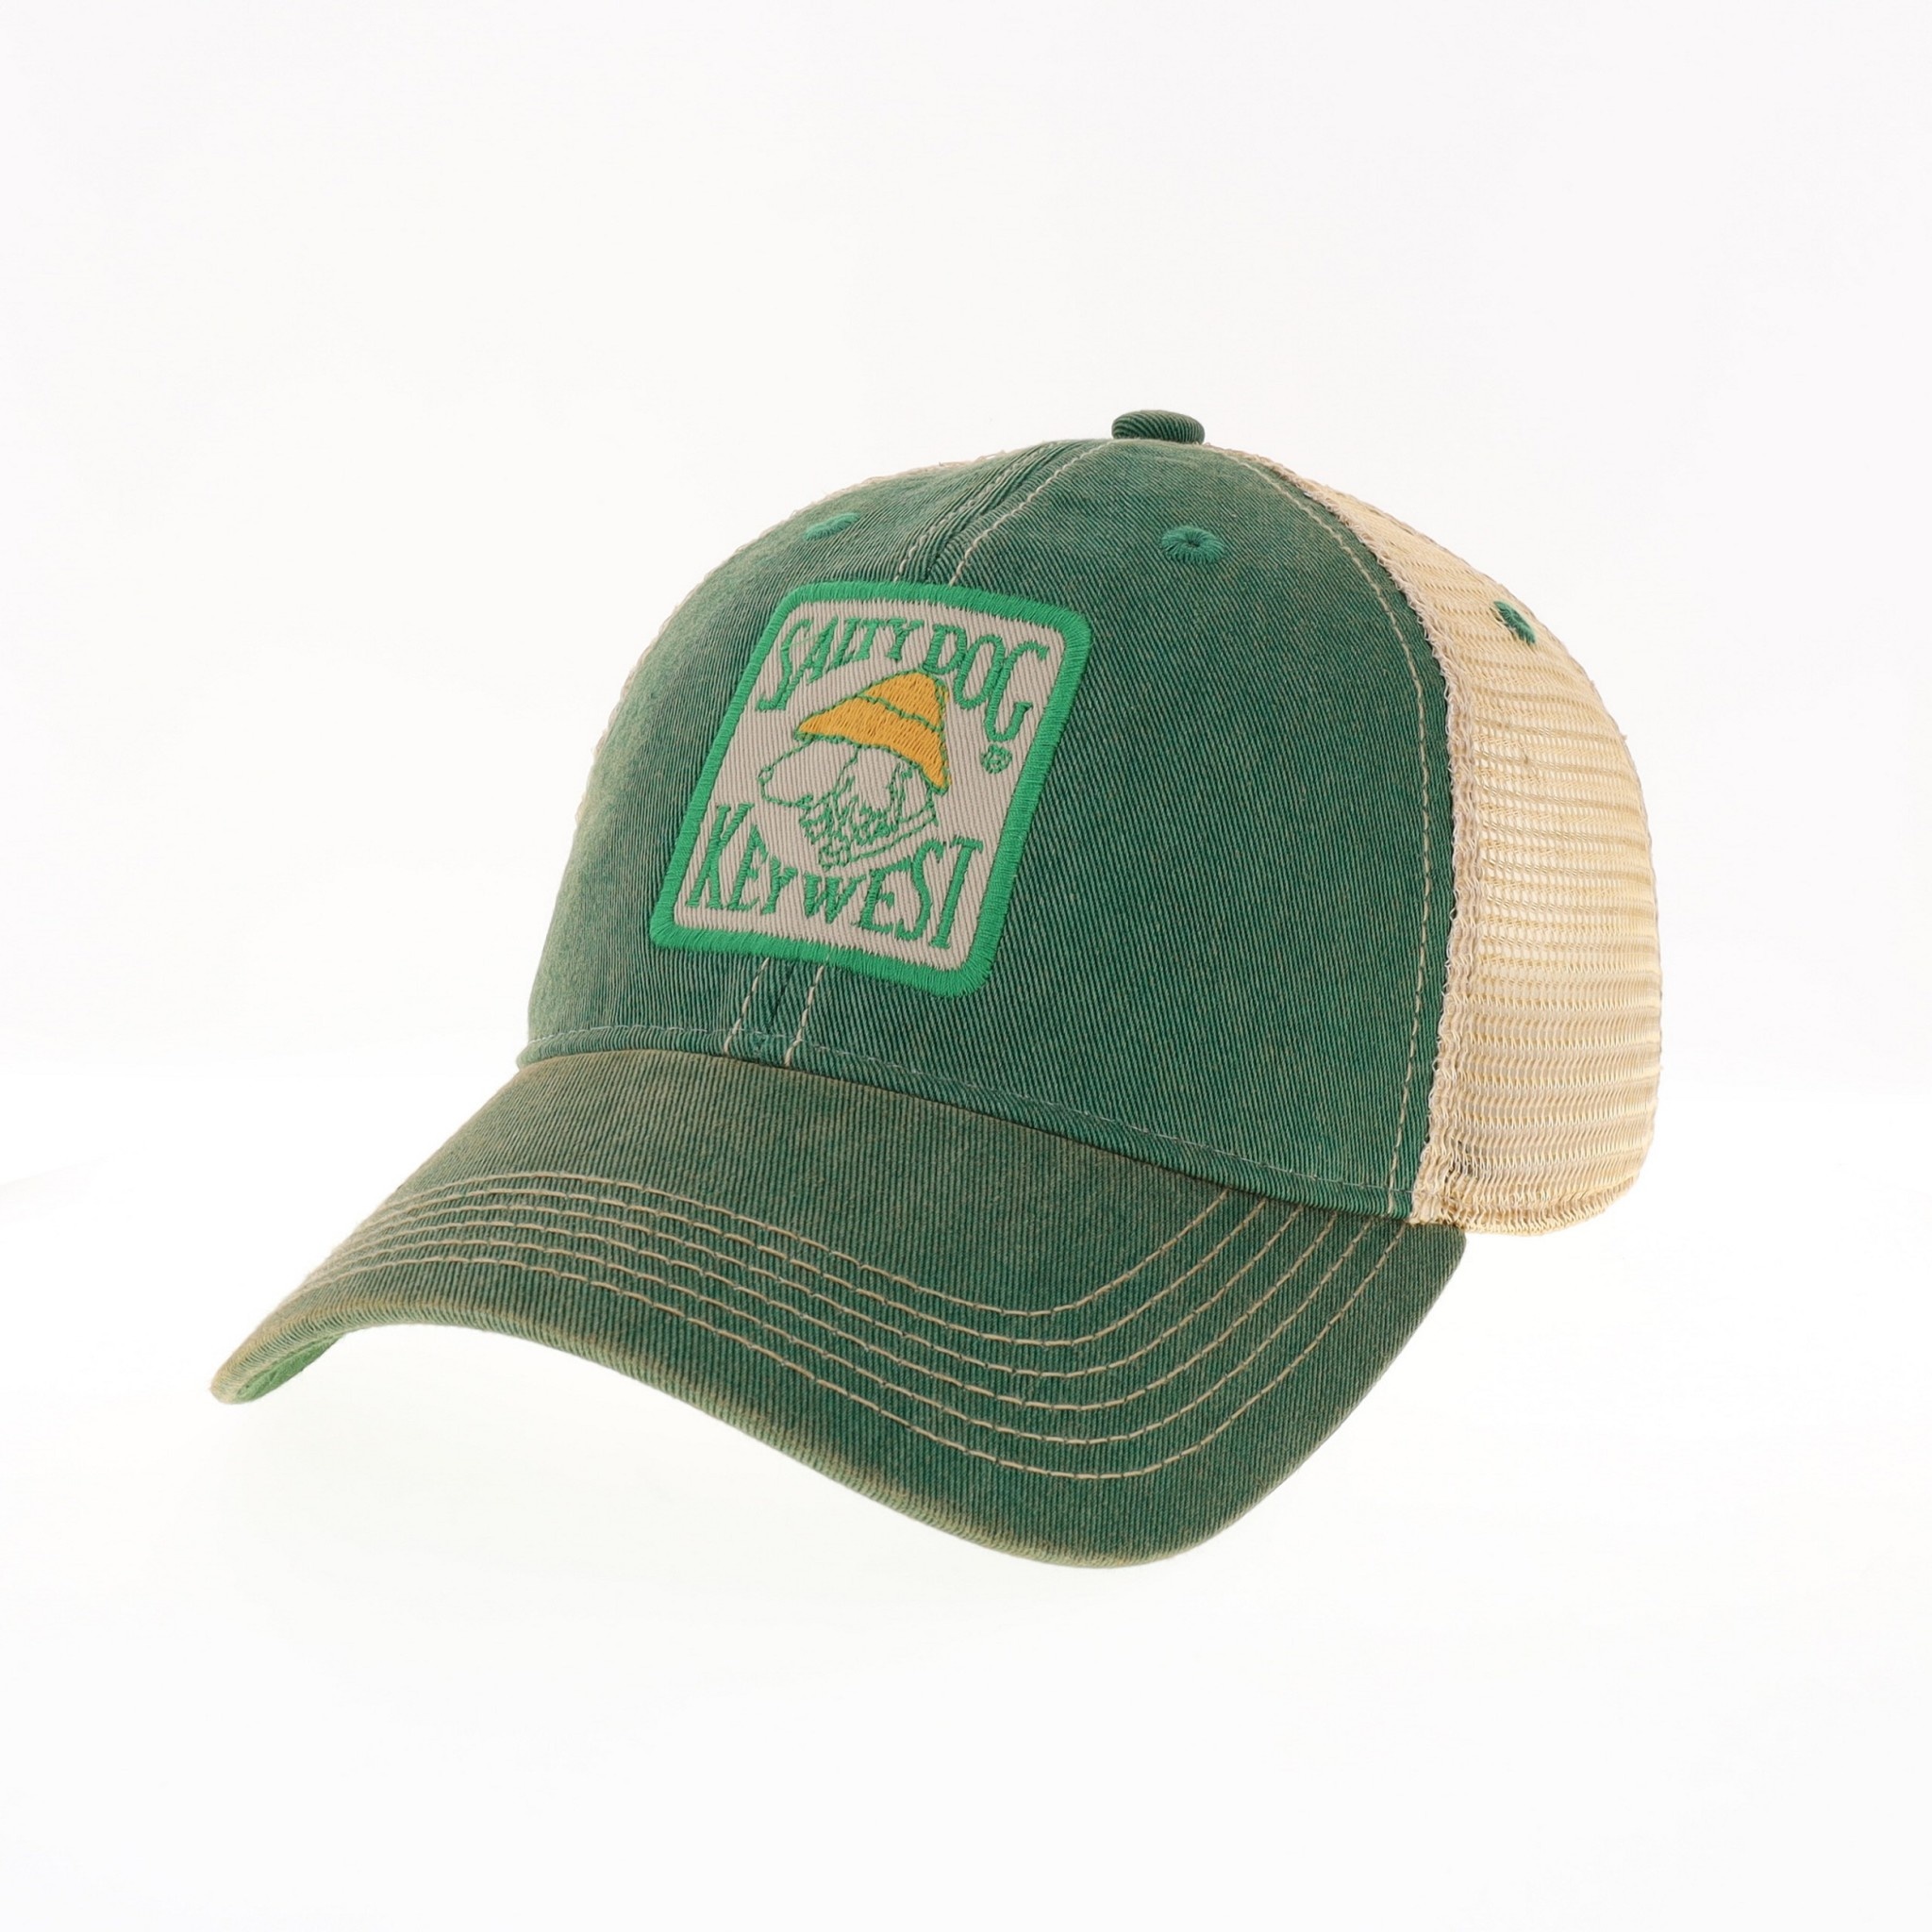 Hat - Key West - Old Favorite Trucker, Kelly Green, Adult - Salty Dog  T-Shirt Factory